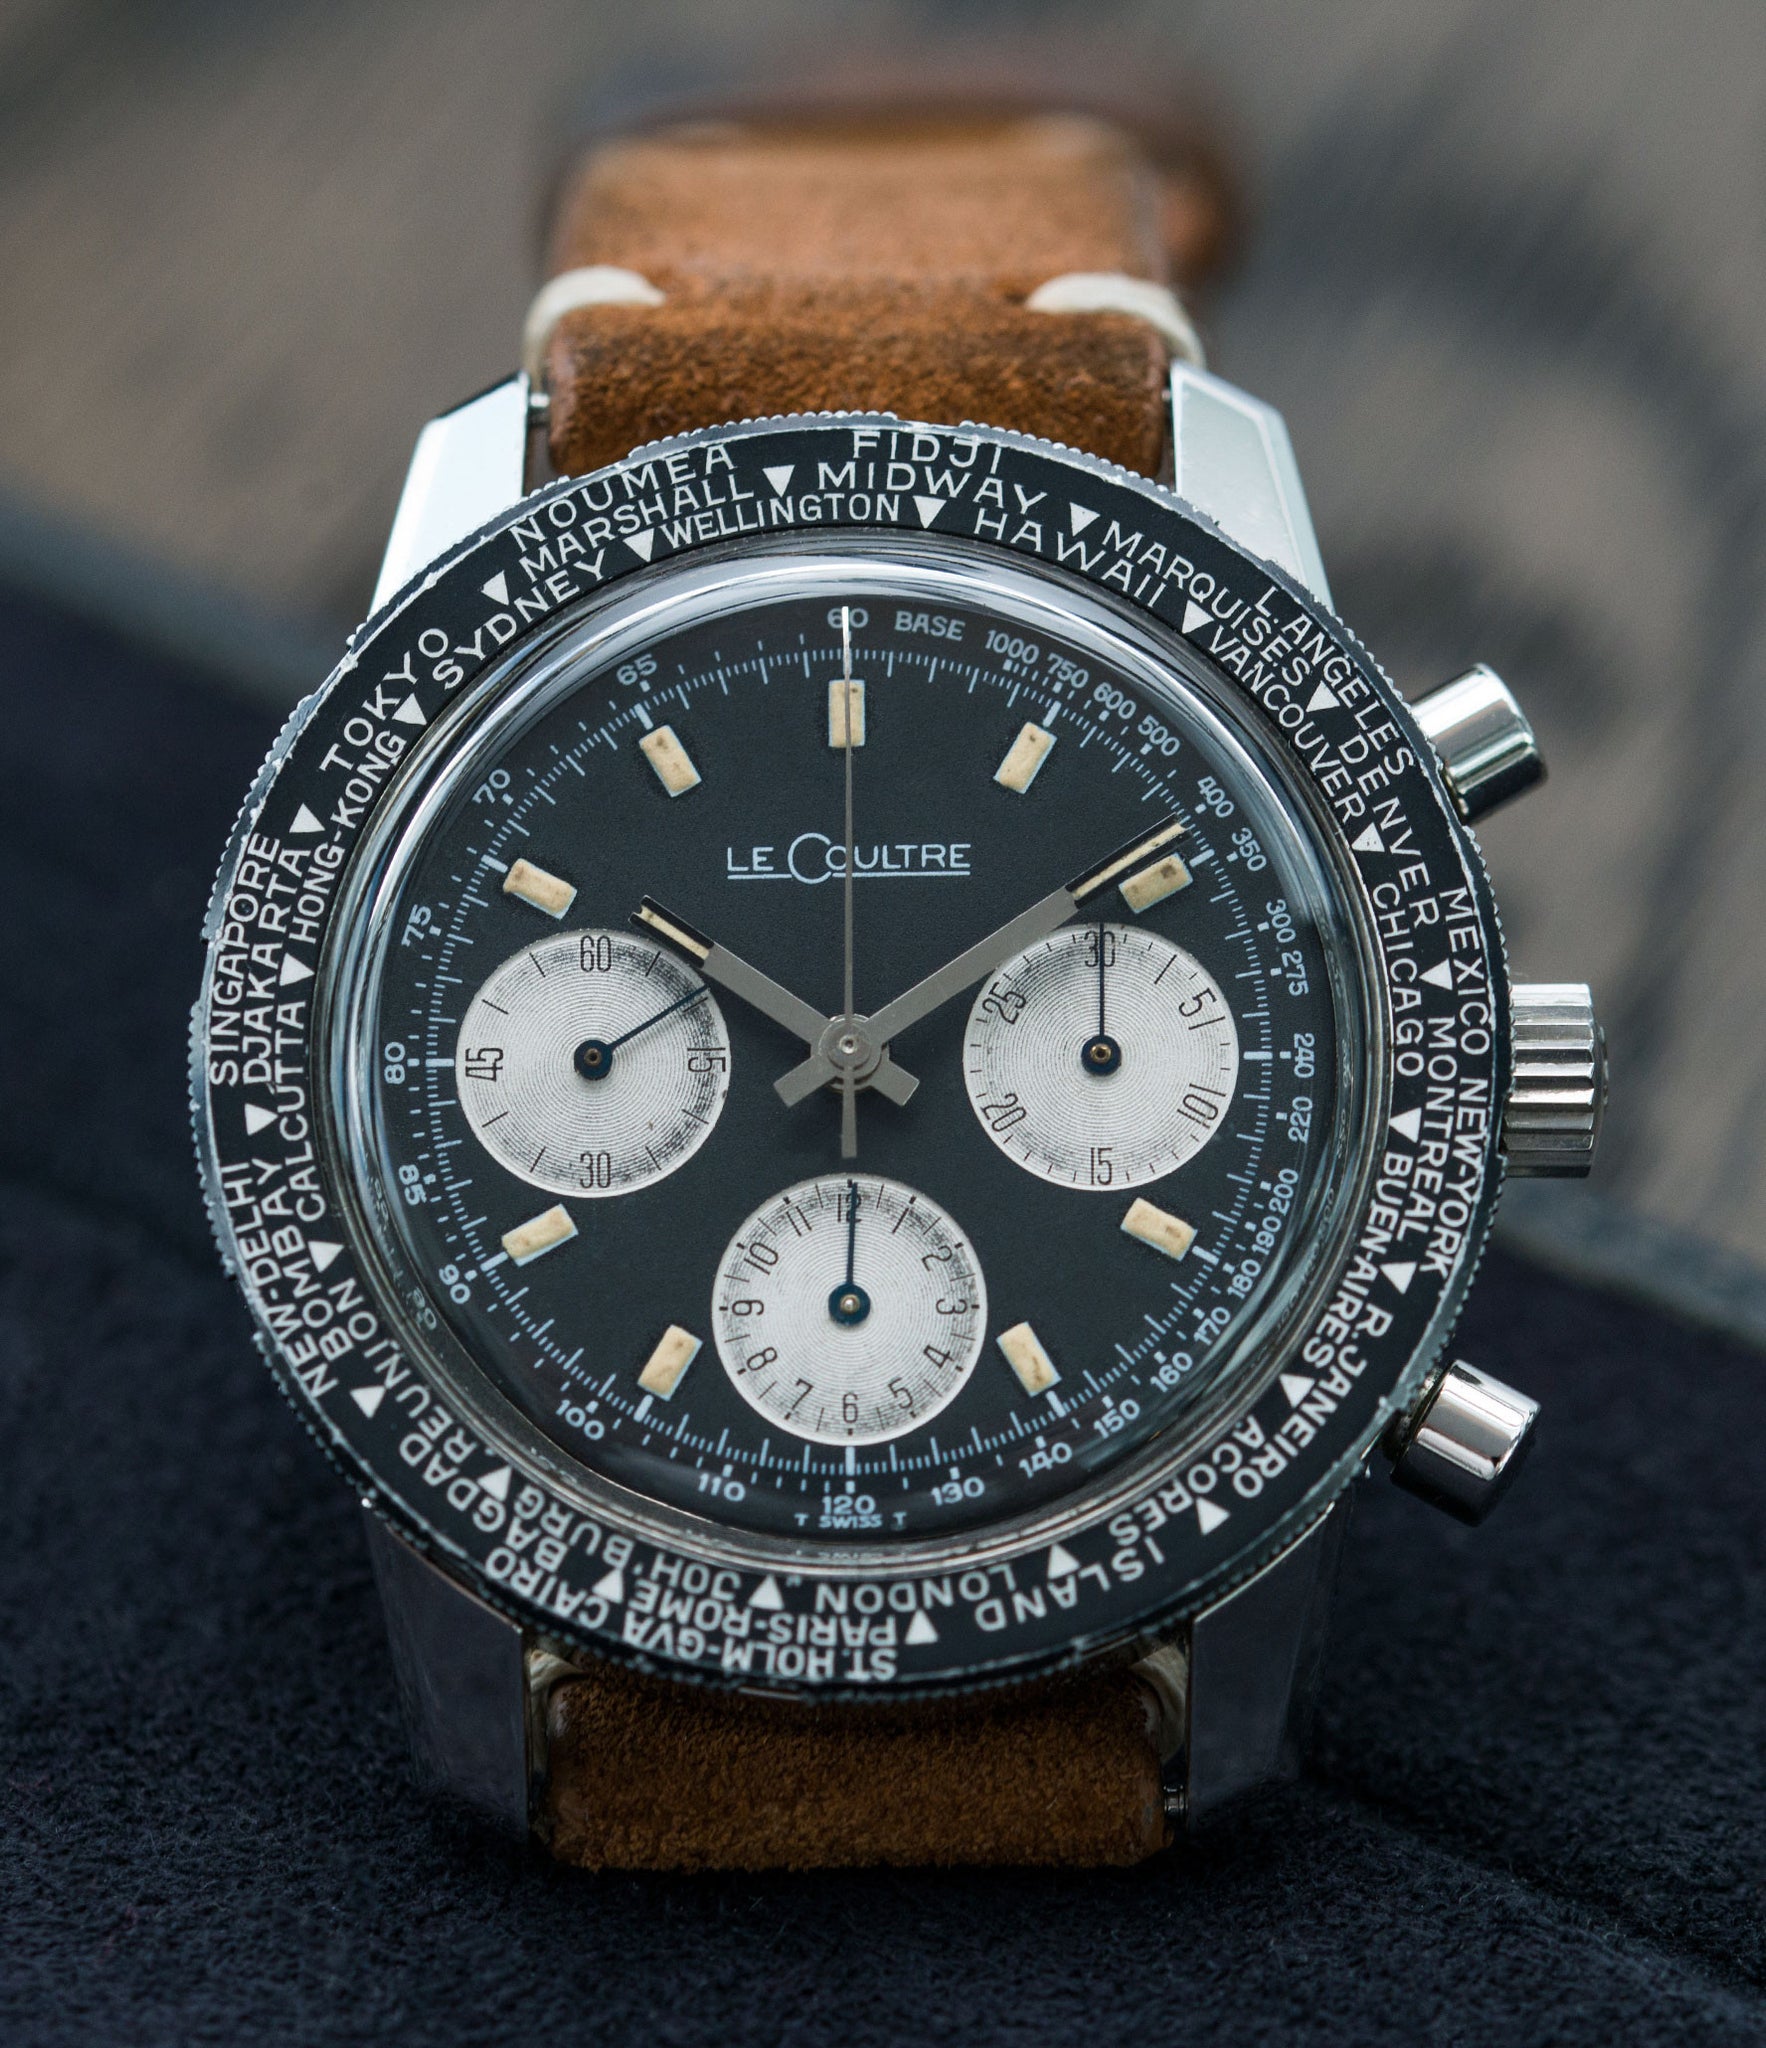 buy vinatage LeCoultre Deep Sea Shark E2643 steel chronograph online at A Collected Man London vintage watch specialist